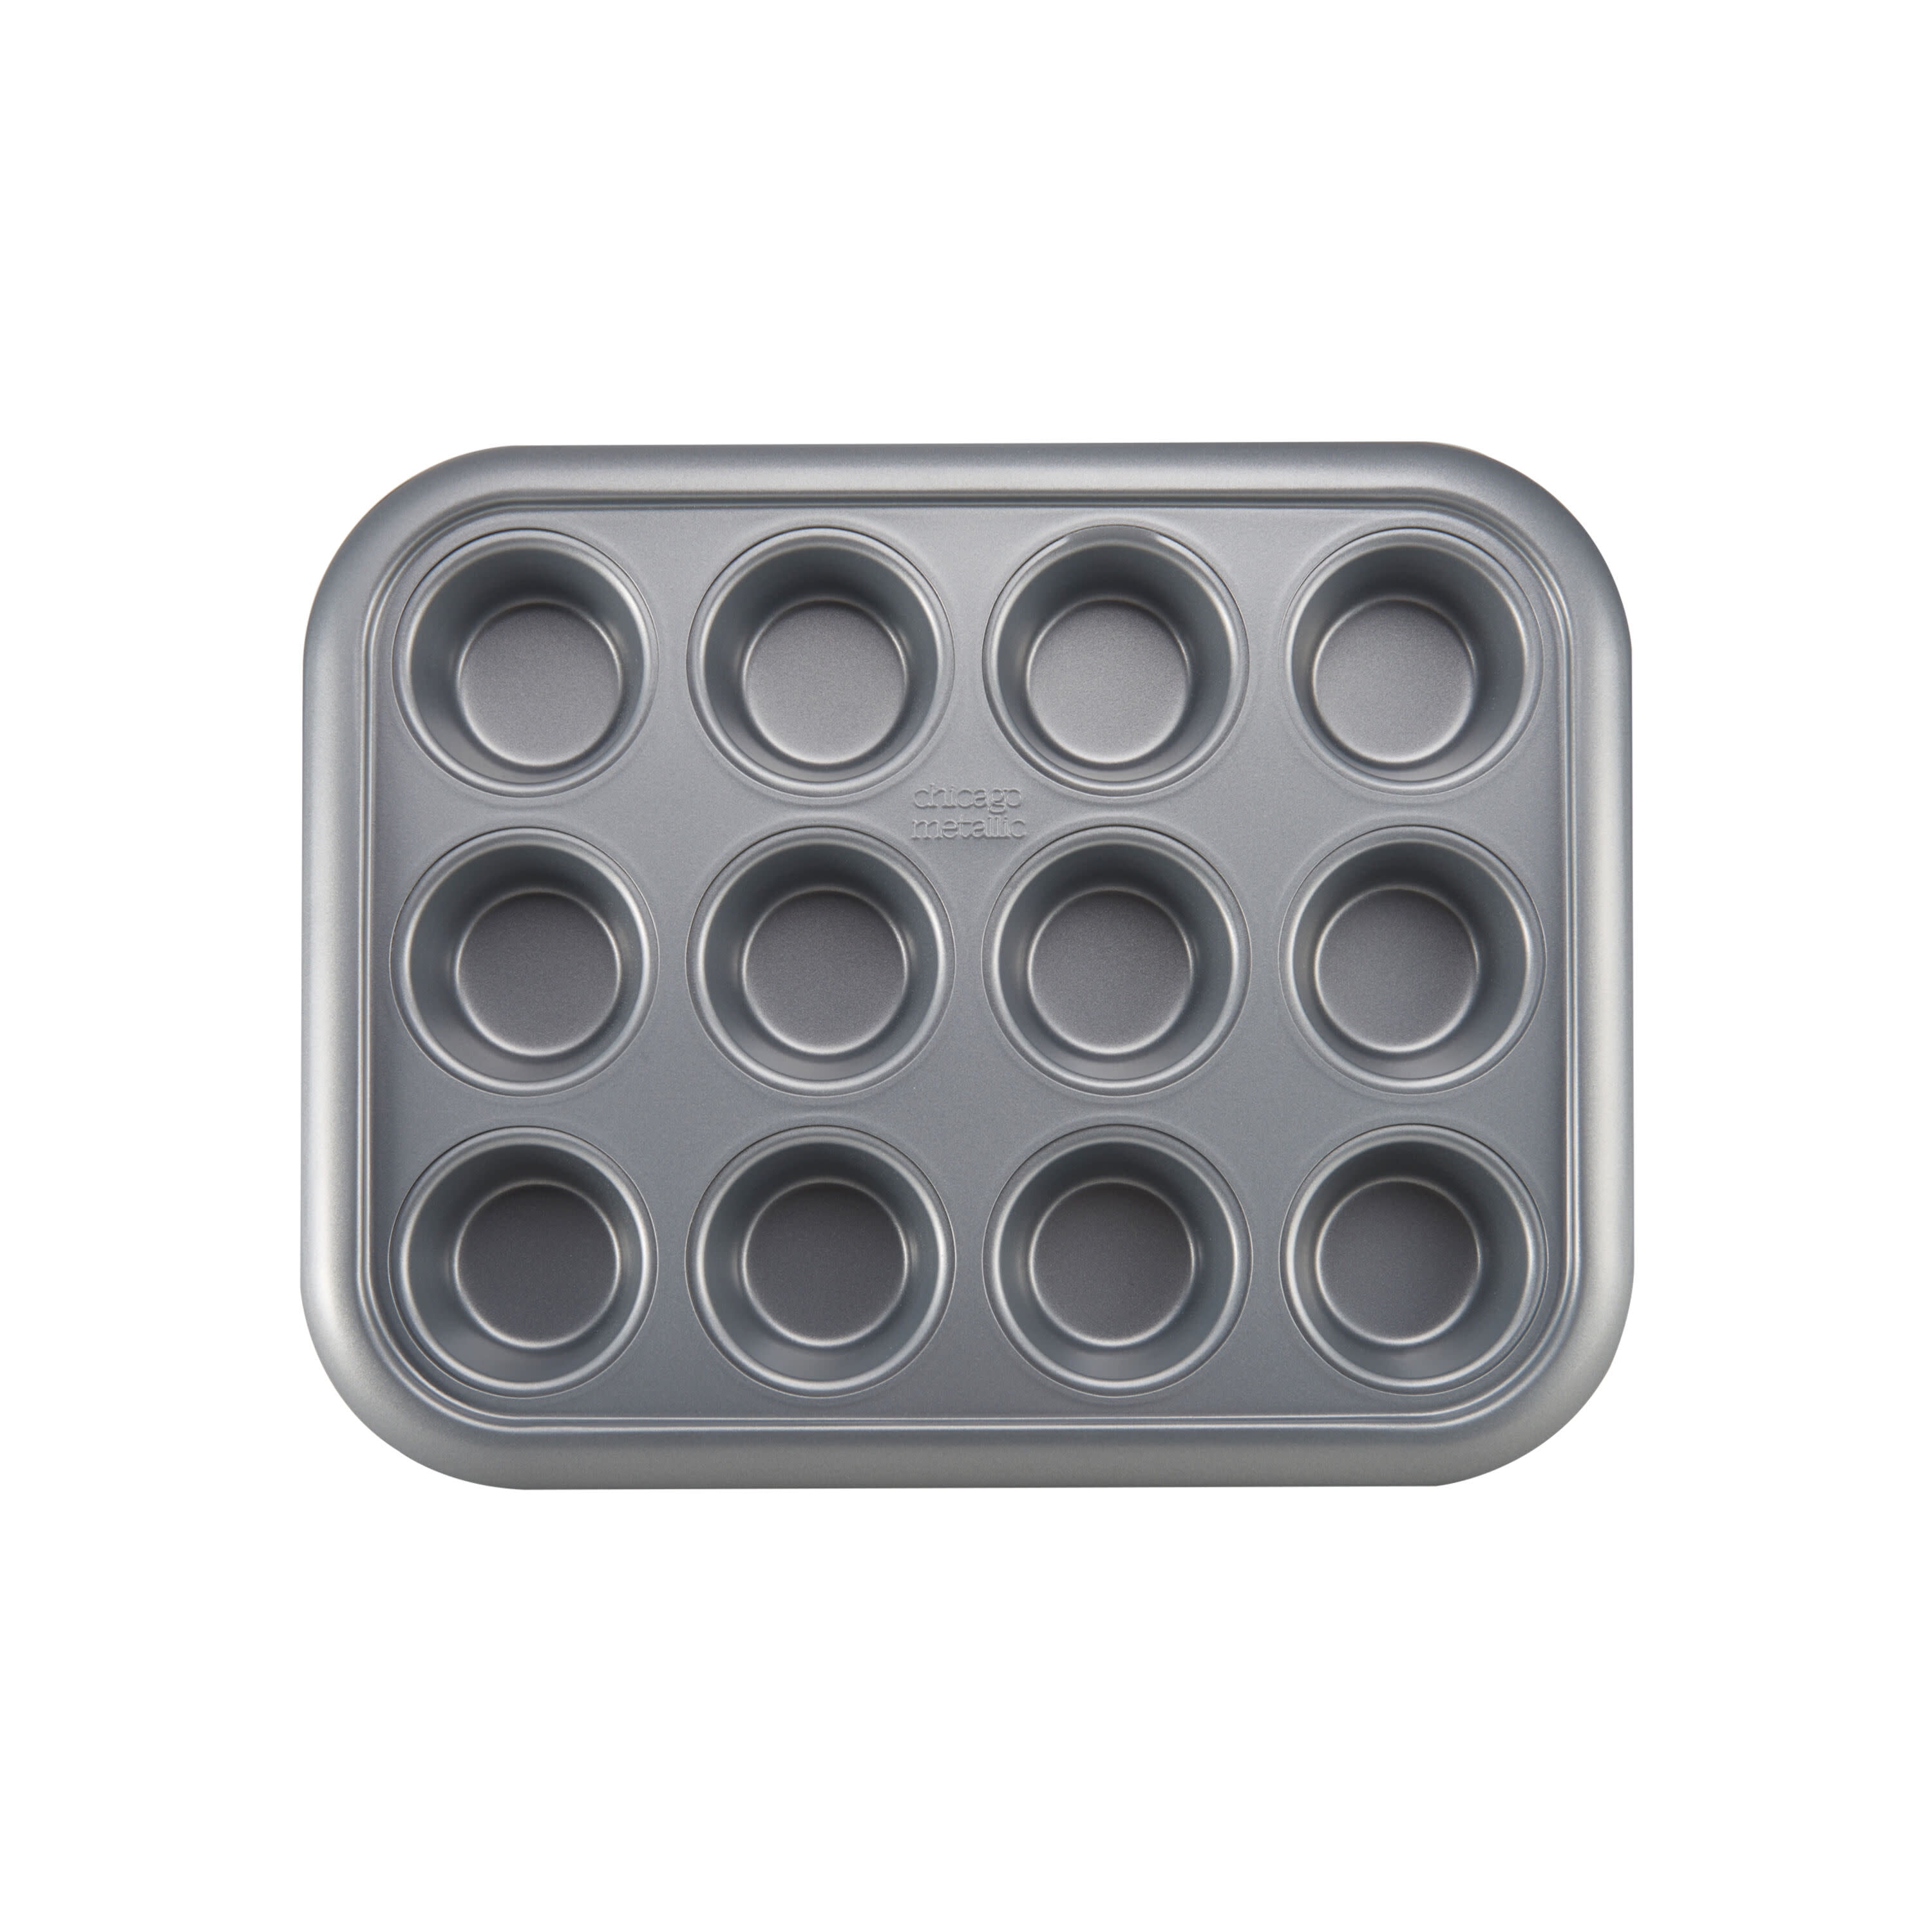 Chicago Metallic 12-Cup Muffin Pan 15.75-Inch-by-11-Inch 